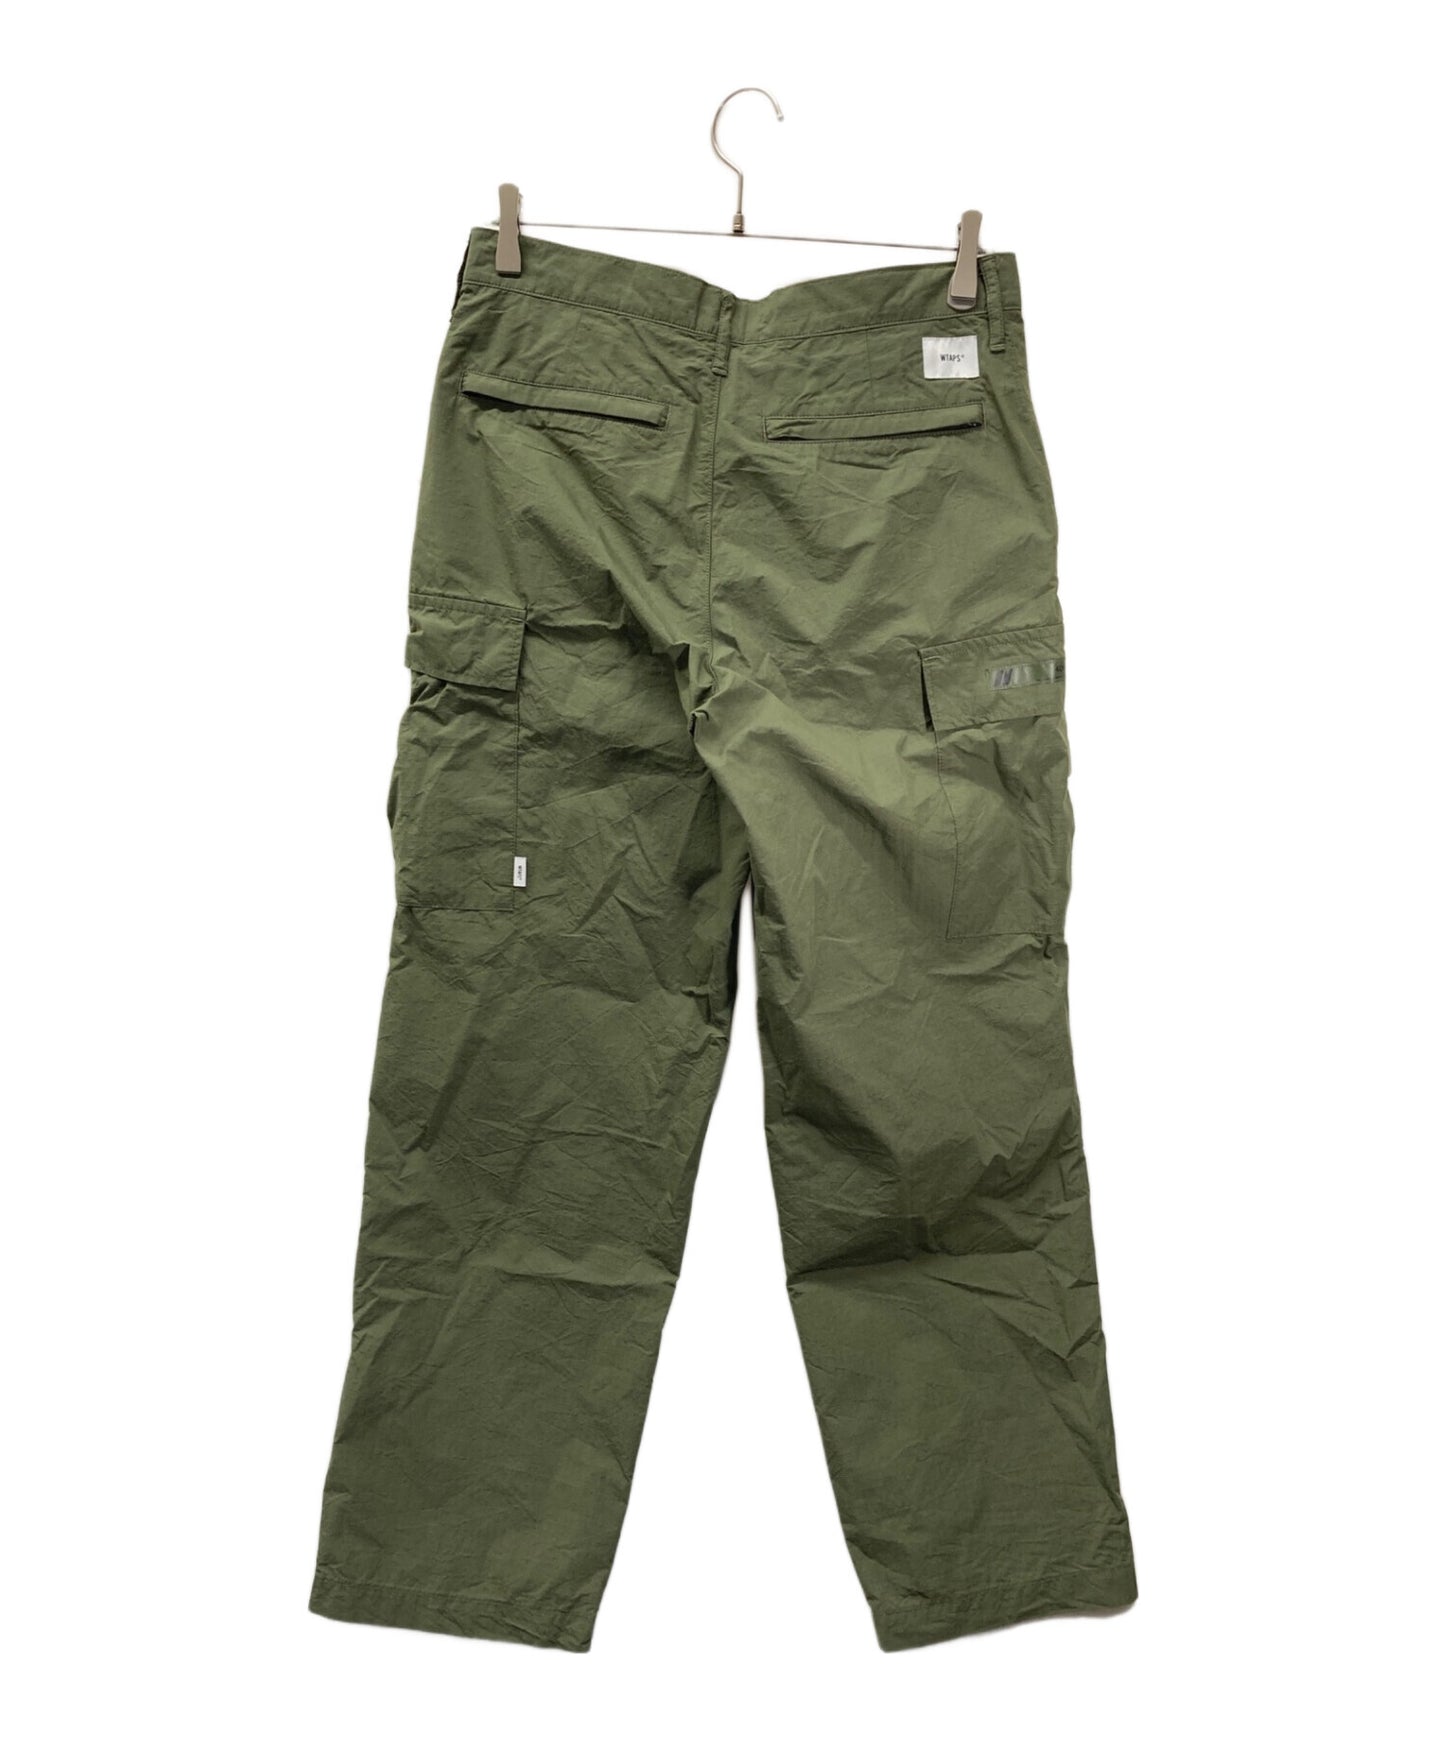 [Pre-owned] WTAPS BGT TROUSERS NYCO RIPSTOP Ripstop WTAPS Double Taps CORDURA Cordura Nylon Nylon Cargo Pants EX45COLLECTION Made in Japan Neighborhood NBHD 222WVDT-PTM06 222wvdt-ptm06